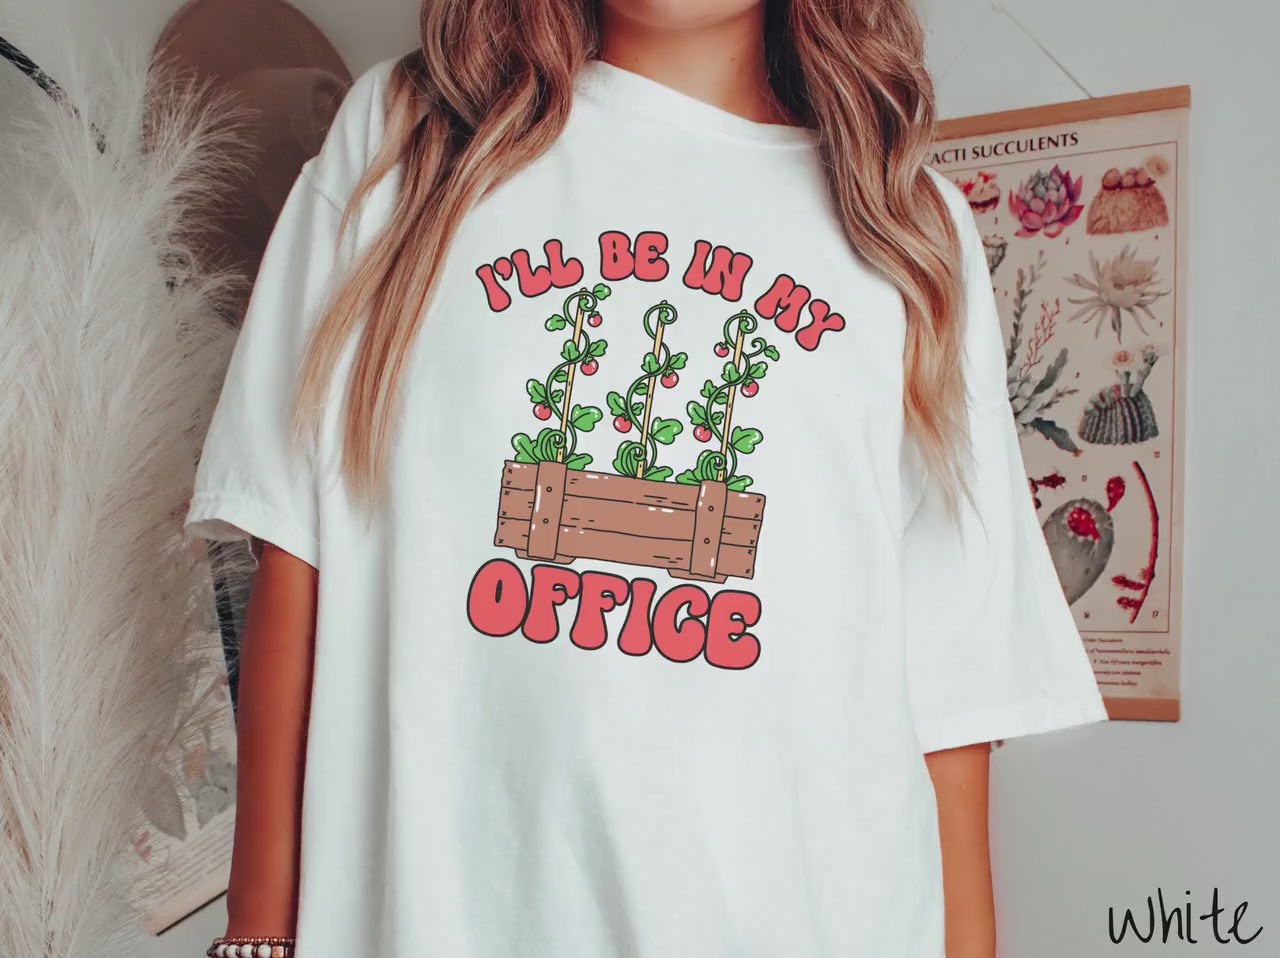 The I'll Be in My Office Vegetable Garden Comfort Colors Shirt, Gift This Vintage Gardening Shirt to your Friends!